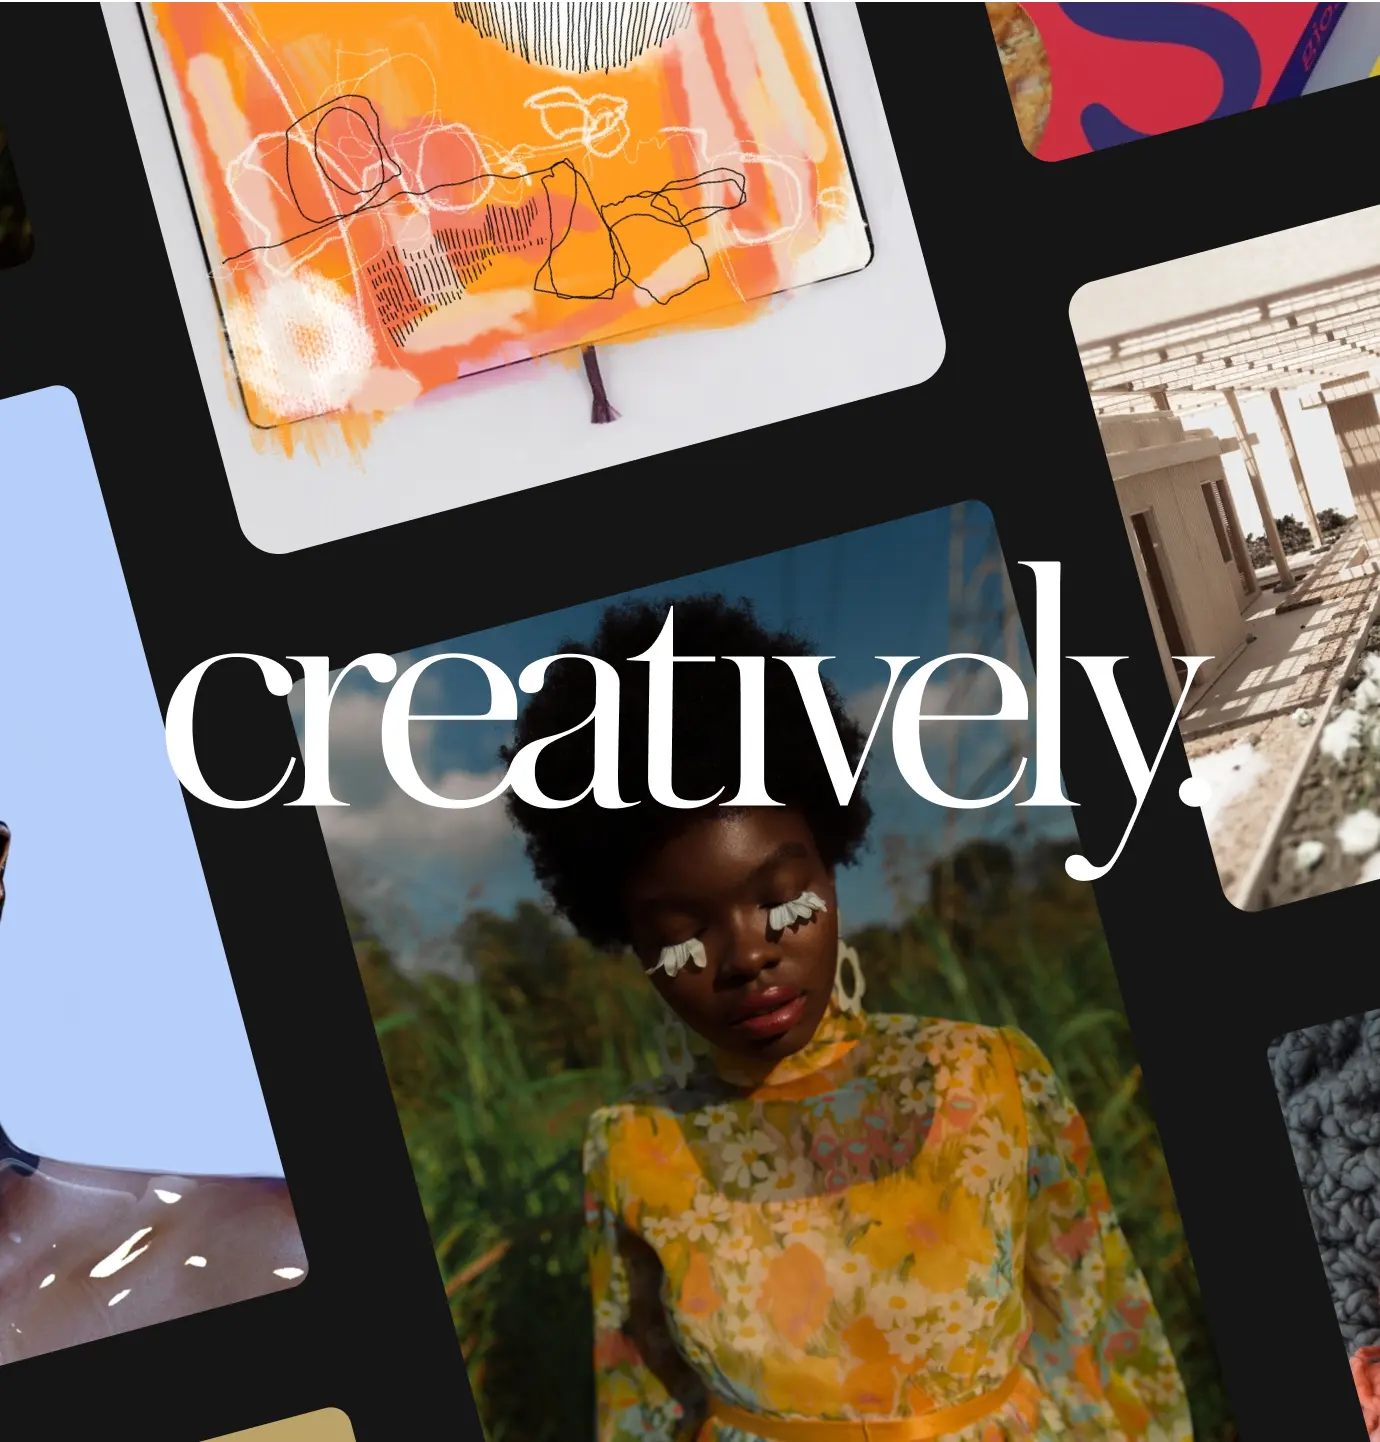 Creatively case study - Rotated grid of all the projects showcased on Creatively's website